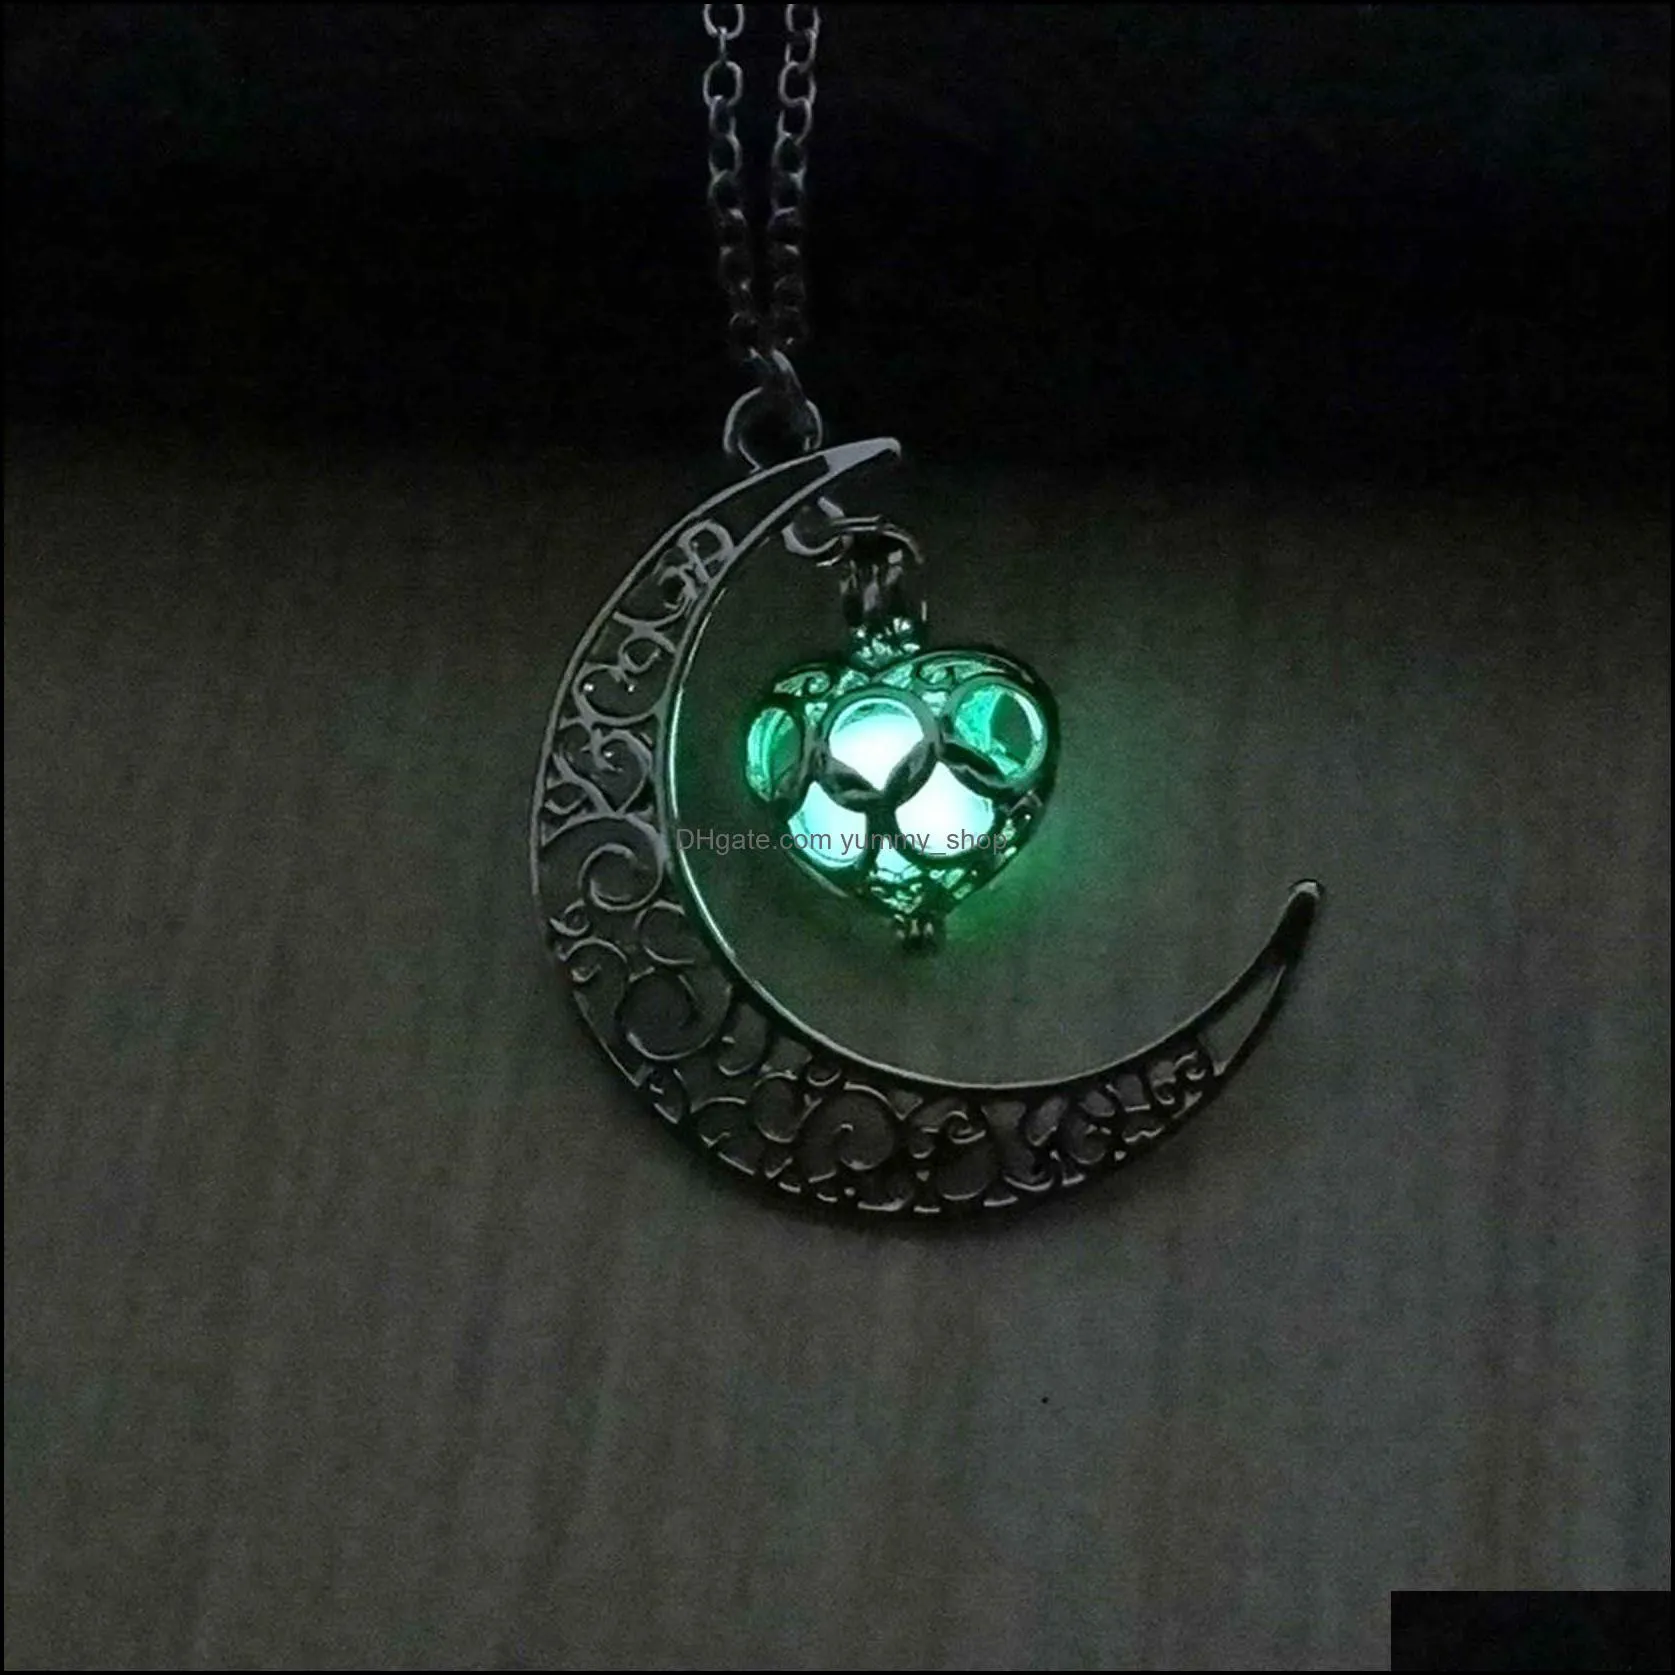 glowing in the dark pendant necklaces choker necklace collares jewelry